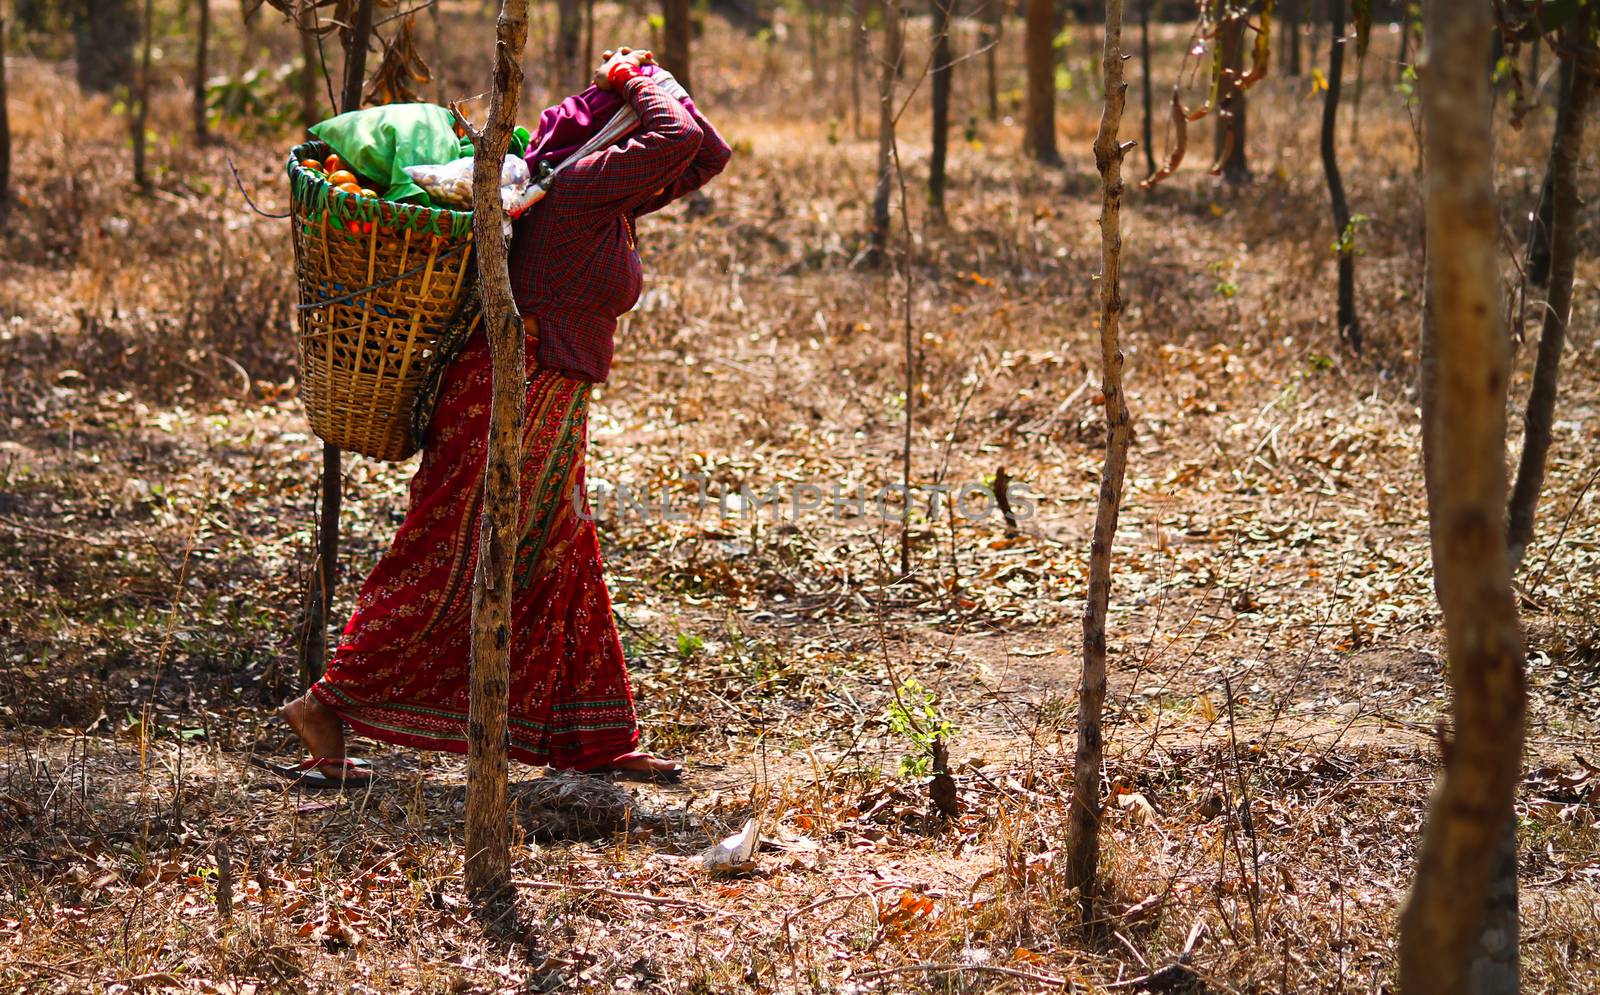 Nepalese Woman Carrying a Woven Basket by Sonnet15